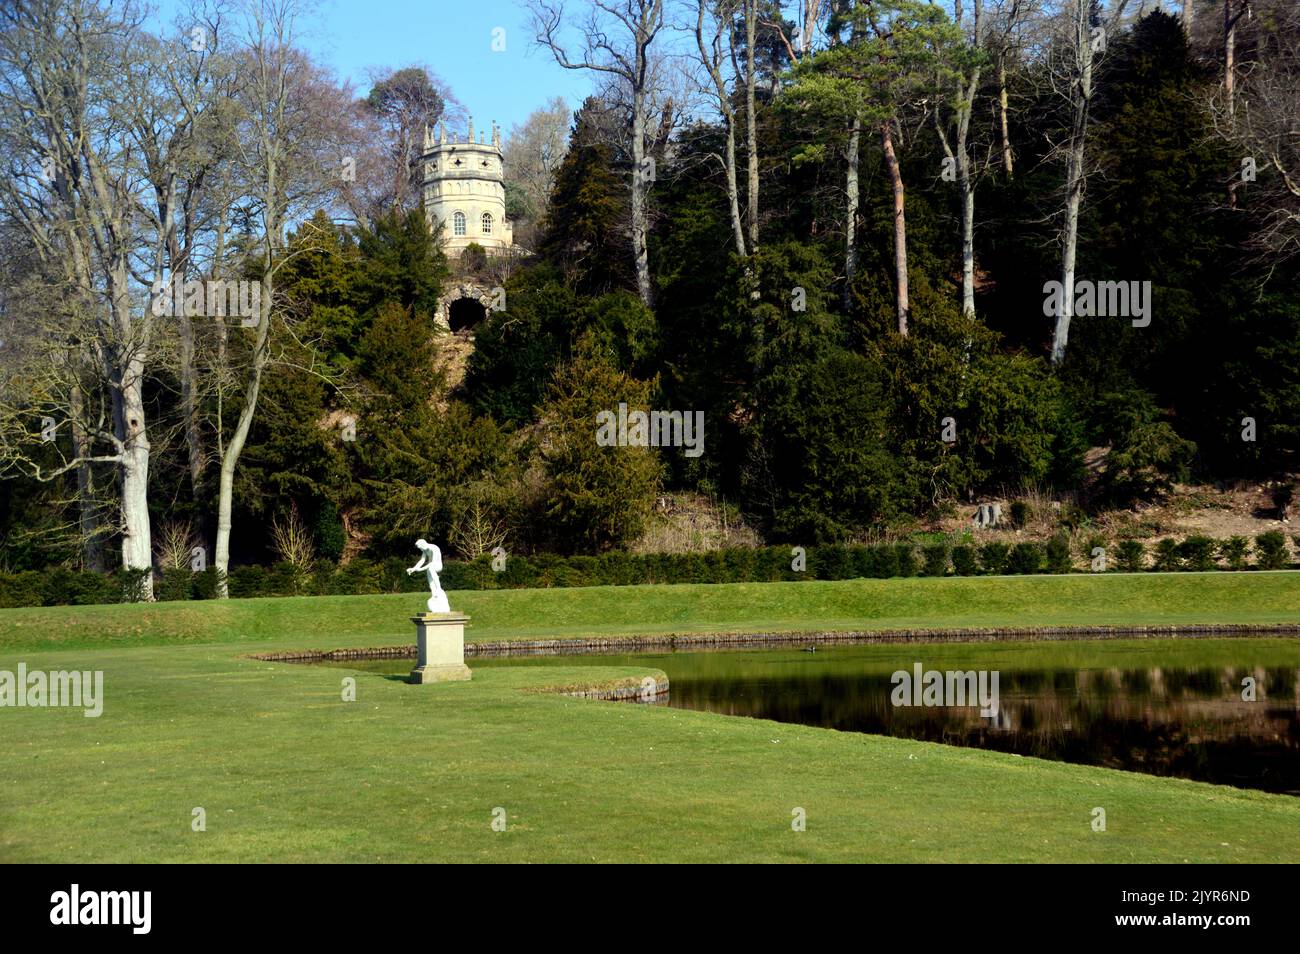 The Statue of Galen and the Octagon Tower (Folly) by Crescent Pond at Fountains Abbey and Studley Royal Water Garden, North Yorkshire, England, UK. Stock Photo